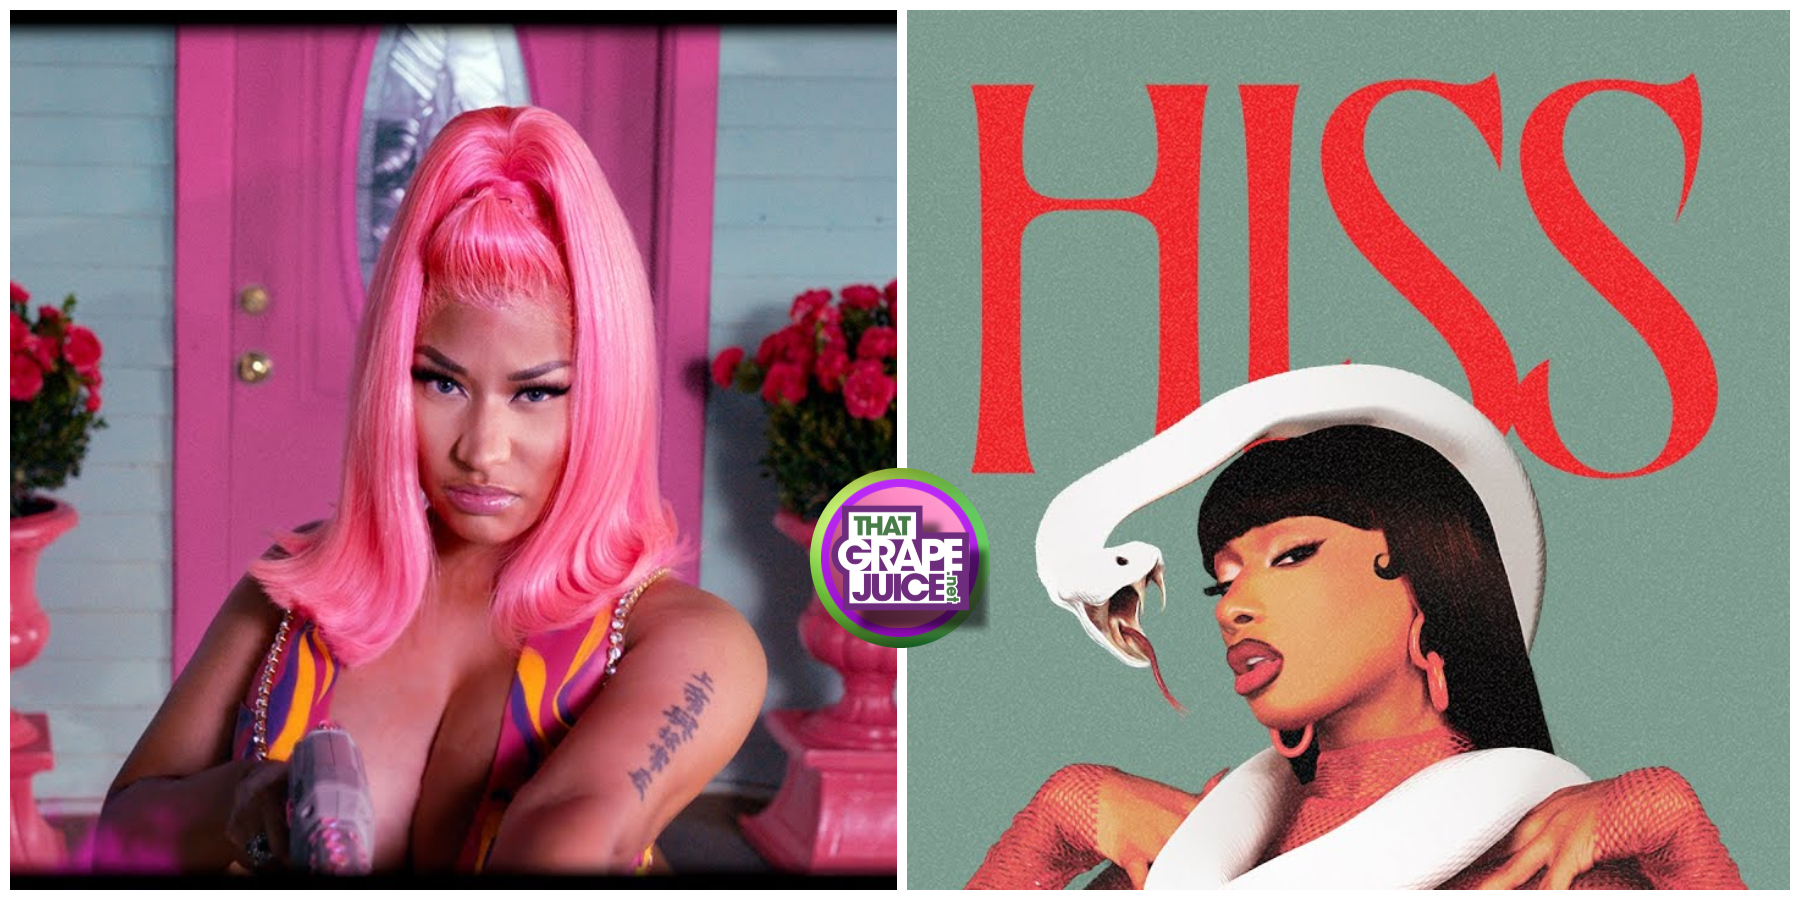 Nicki Minaj Slams Megan Thee Stallion AGAIN for Dissing Her Family in ‘Hiss’: “Apologize To Your [Dead] Mother for Lying Nasty Serpent”